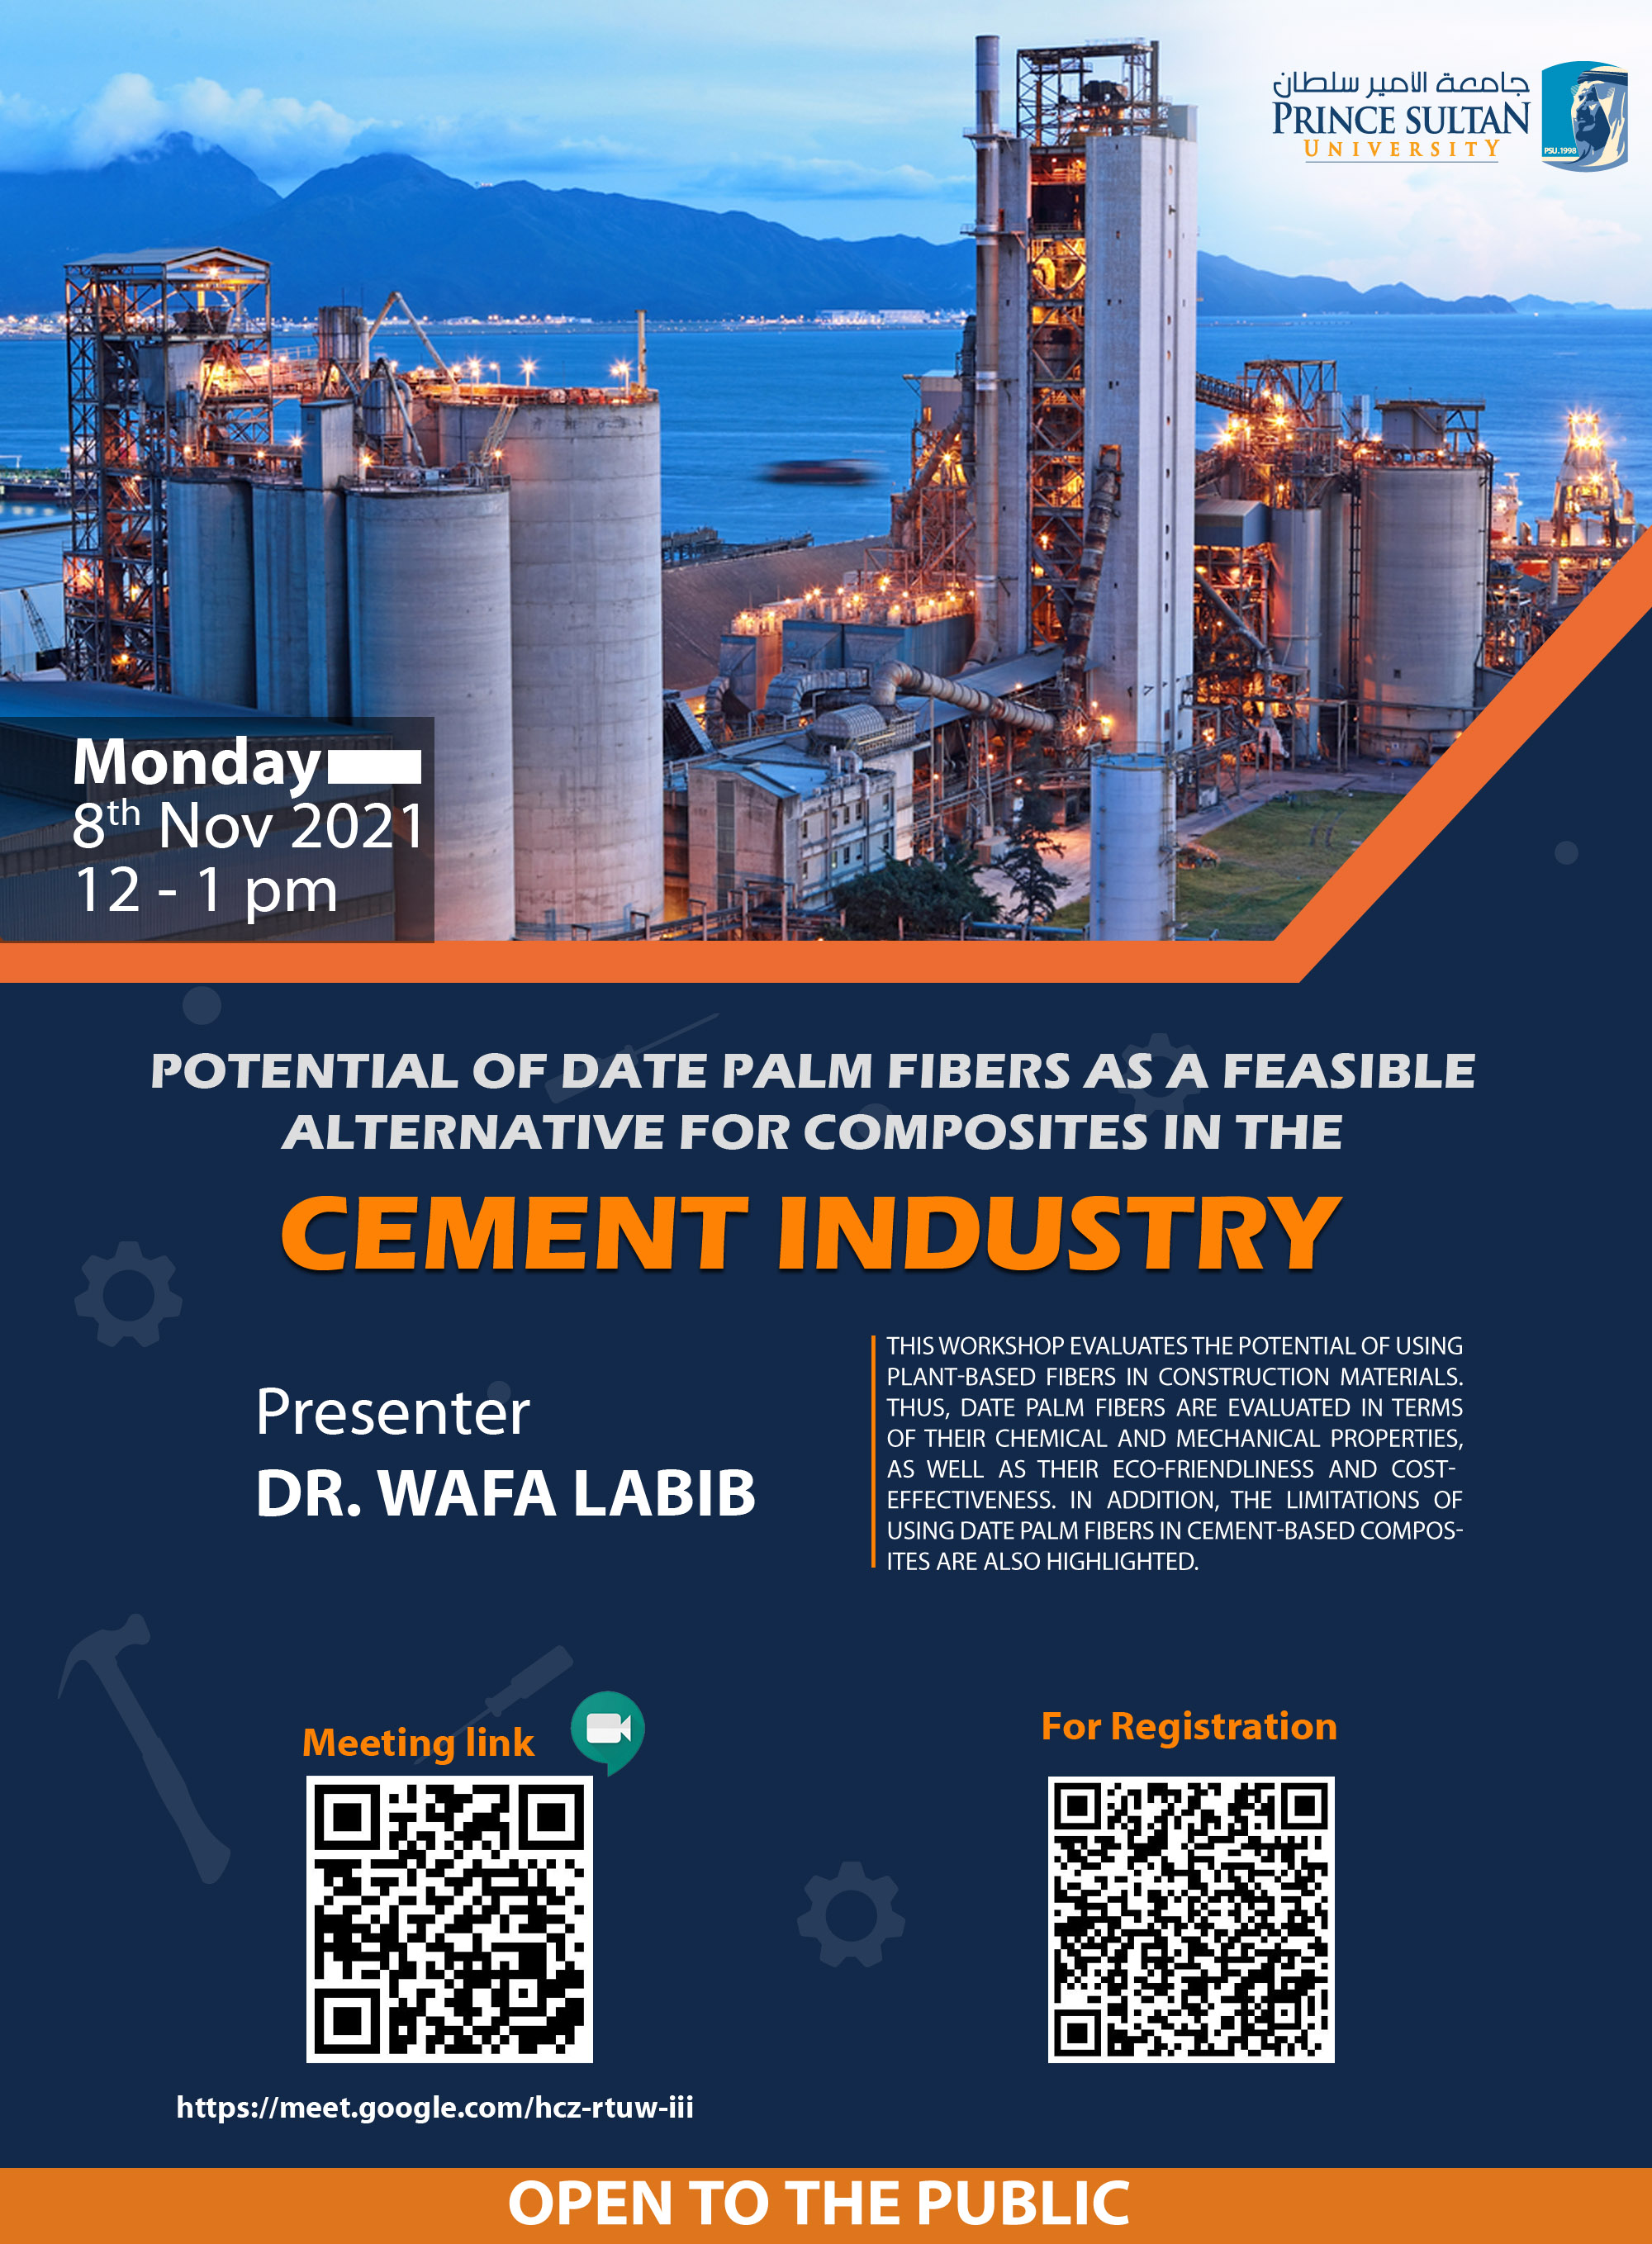 Potential of Date Palm Fibers as a Feasible Alternative for Composites in the Cement industry